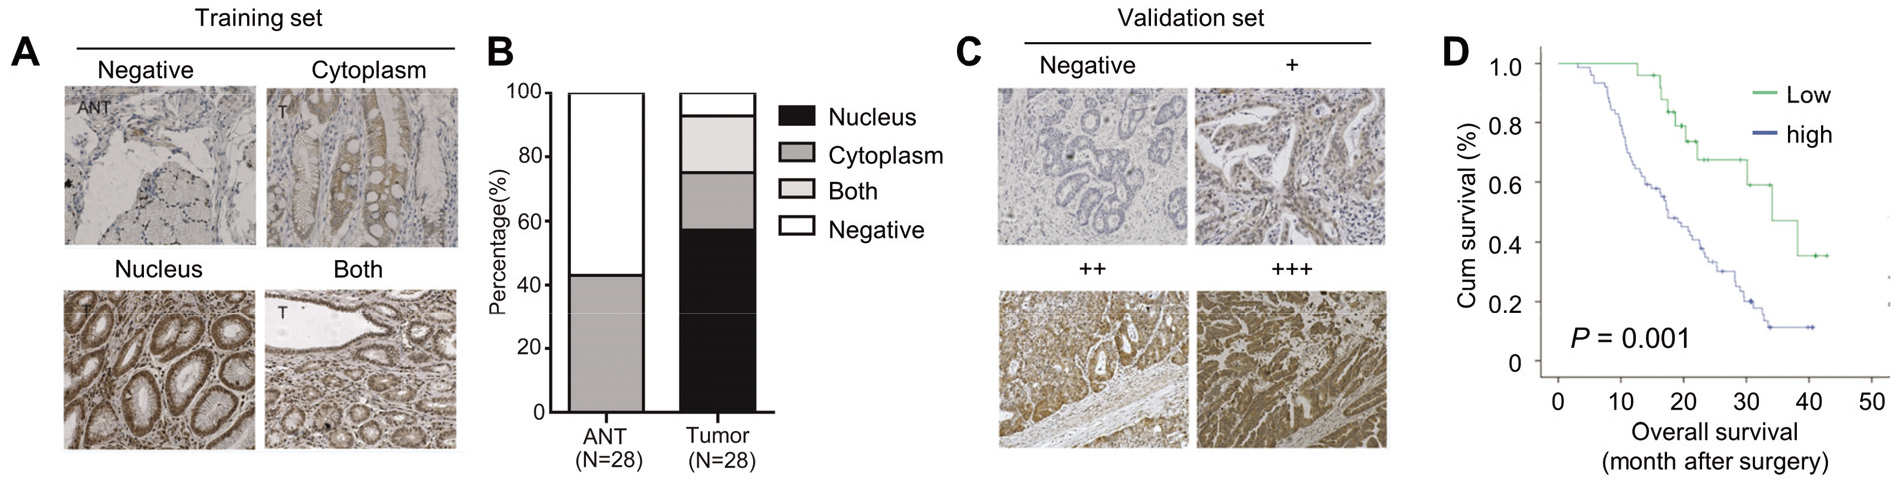 YAP is upregulated in GC tissues and correlates with poor prognosis. x100. (A) Expressions of YAP in gastric cancer and corresponding adjacent non-tumor tissues detected by immunohistochemistry in training set. (B) Subcellular localization of YAP expression in 28 gastric cancer and corresponding adjacent non-tumor tissues. (C) Expressions of YAP in gastric cancer and corresponding adjacent non-tumor tissues detected by immunohistochemistry in validation set. (D) Kaplan-Meier analysis of overall survival time in 28 gastric cancer patients according to YAP expression.